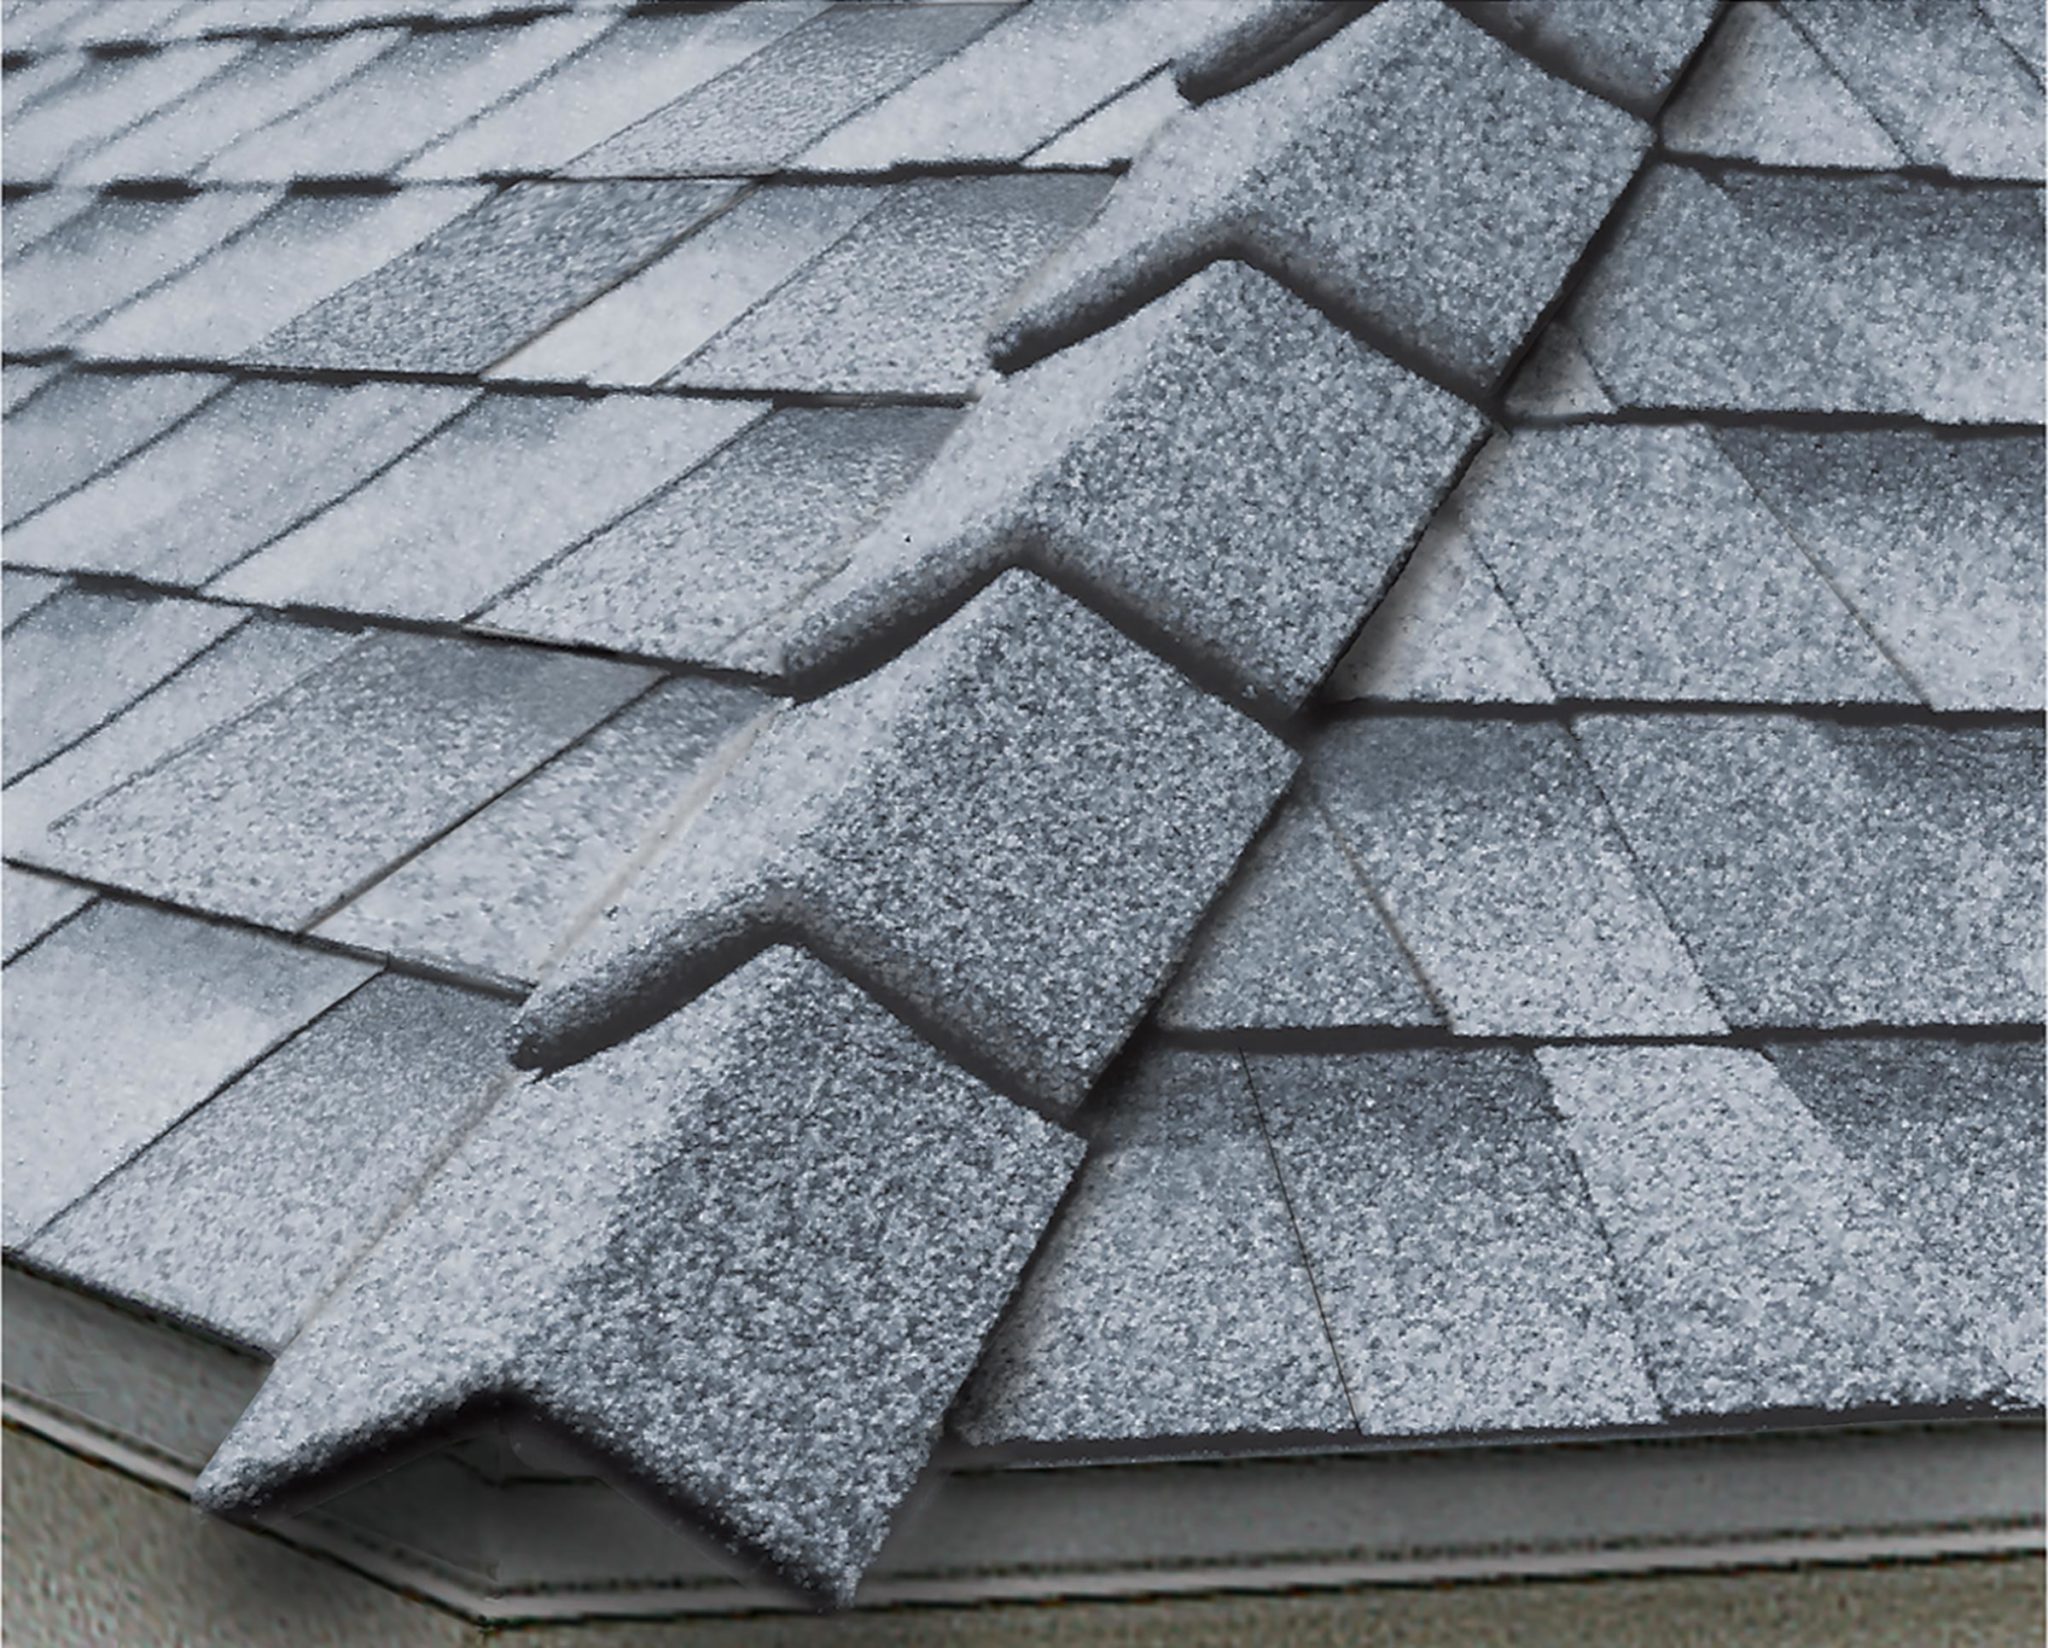 close view of IKO Ultra HP shingles on a roof hip